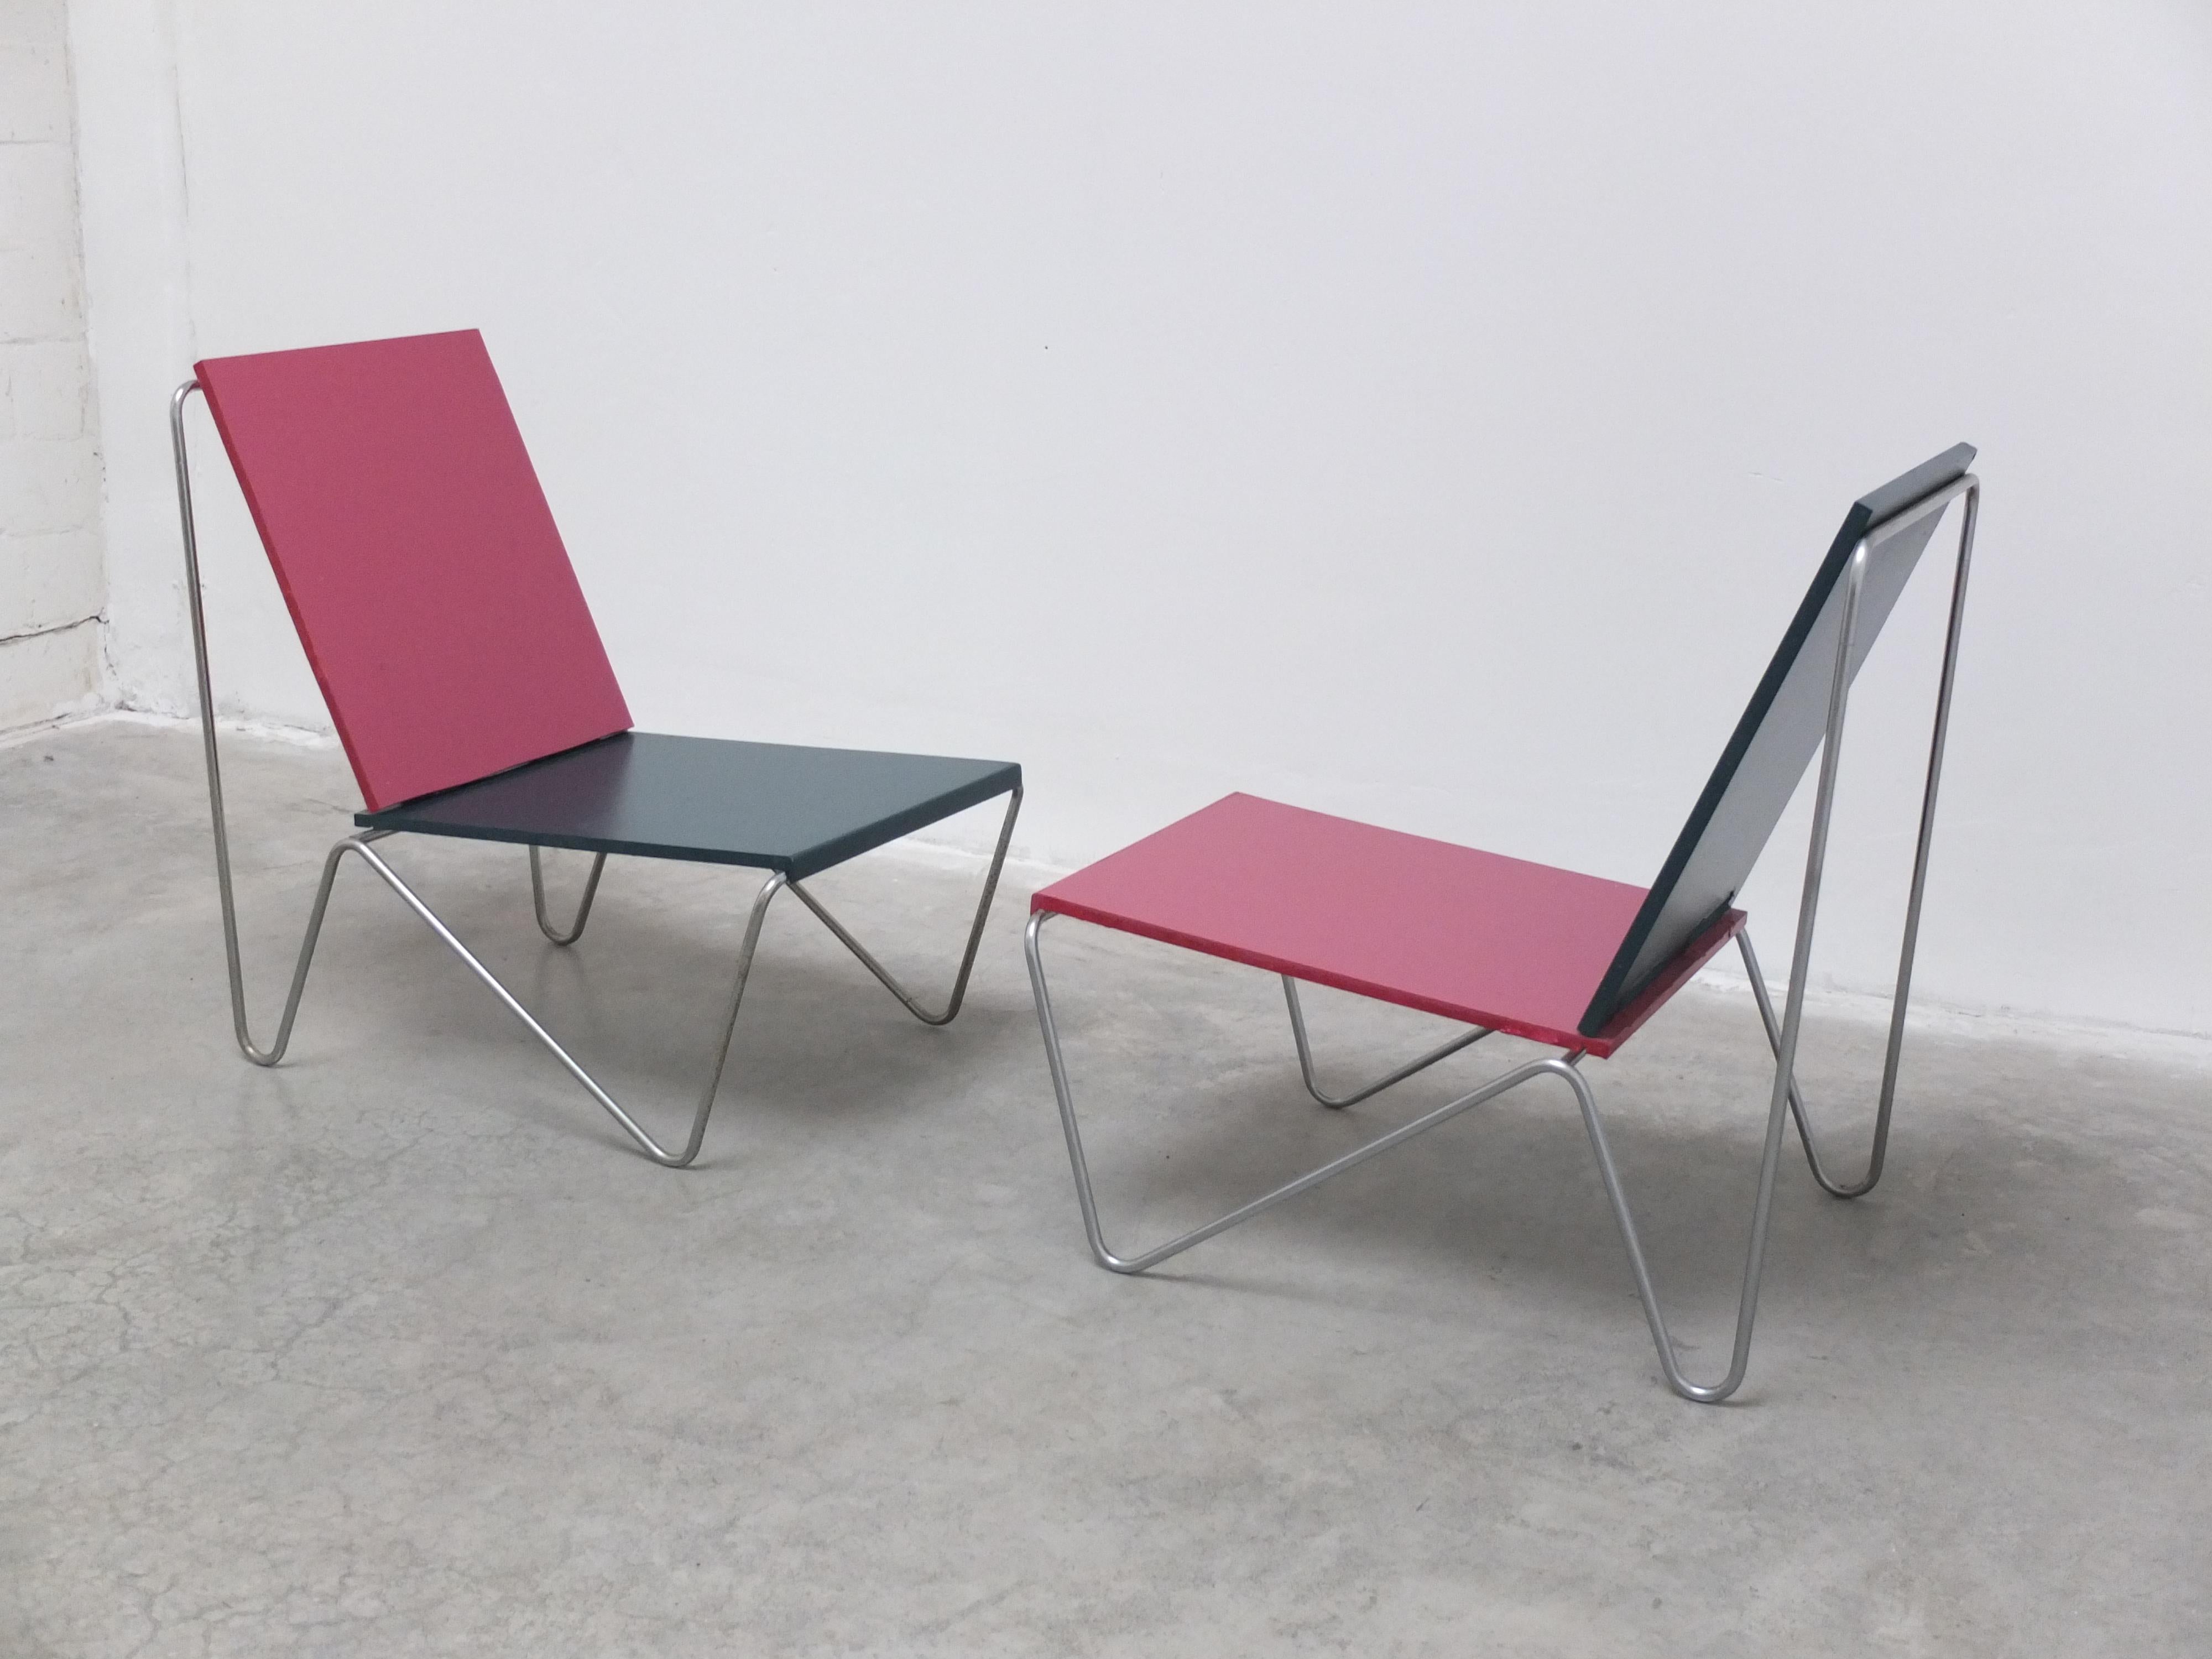 Unique Pair of 'Bachelor' Chairs by Verner Panton for Fritz Hansen, 1971 For Sale 8